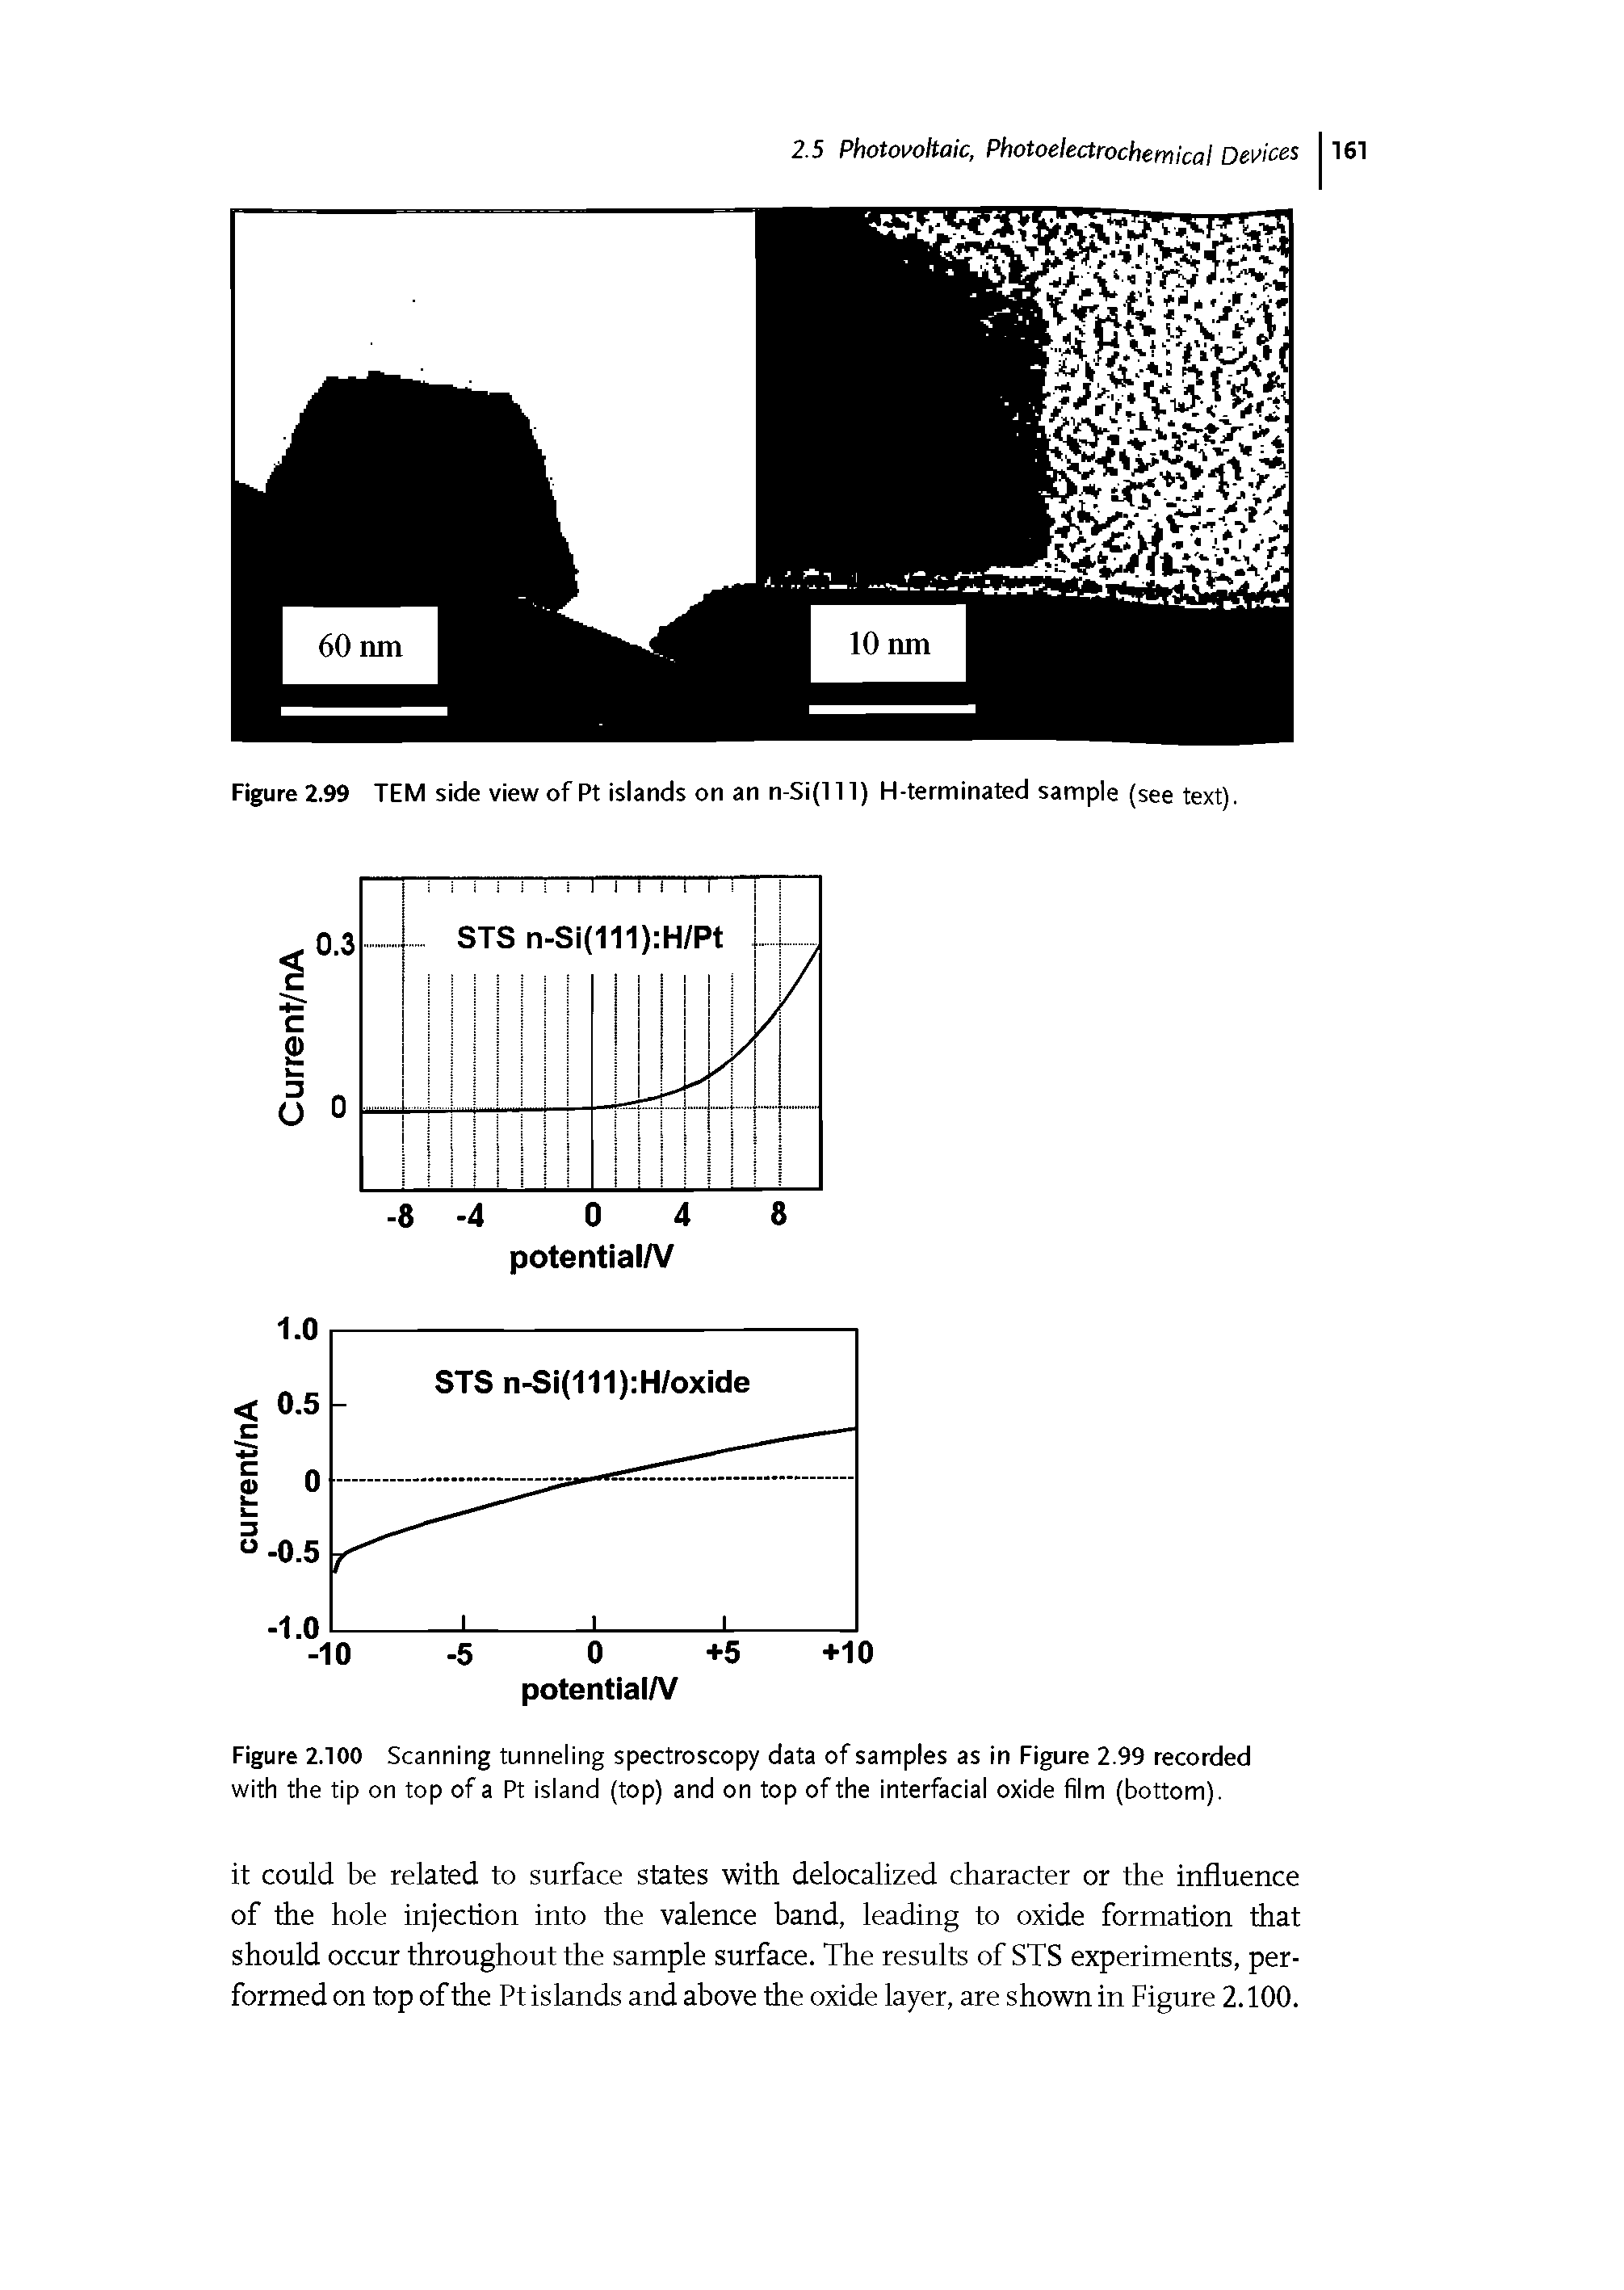 Figure 2.100 Scanning tunneling spectroscopy data of samples as in Figure 2.99 recorded with the tip on top of a Pt island (top) and on top of the interfacial oxide film (bottom).